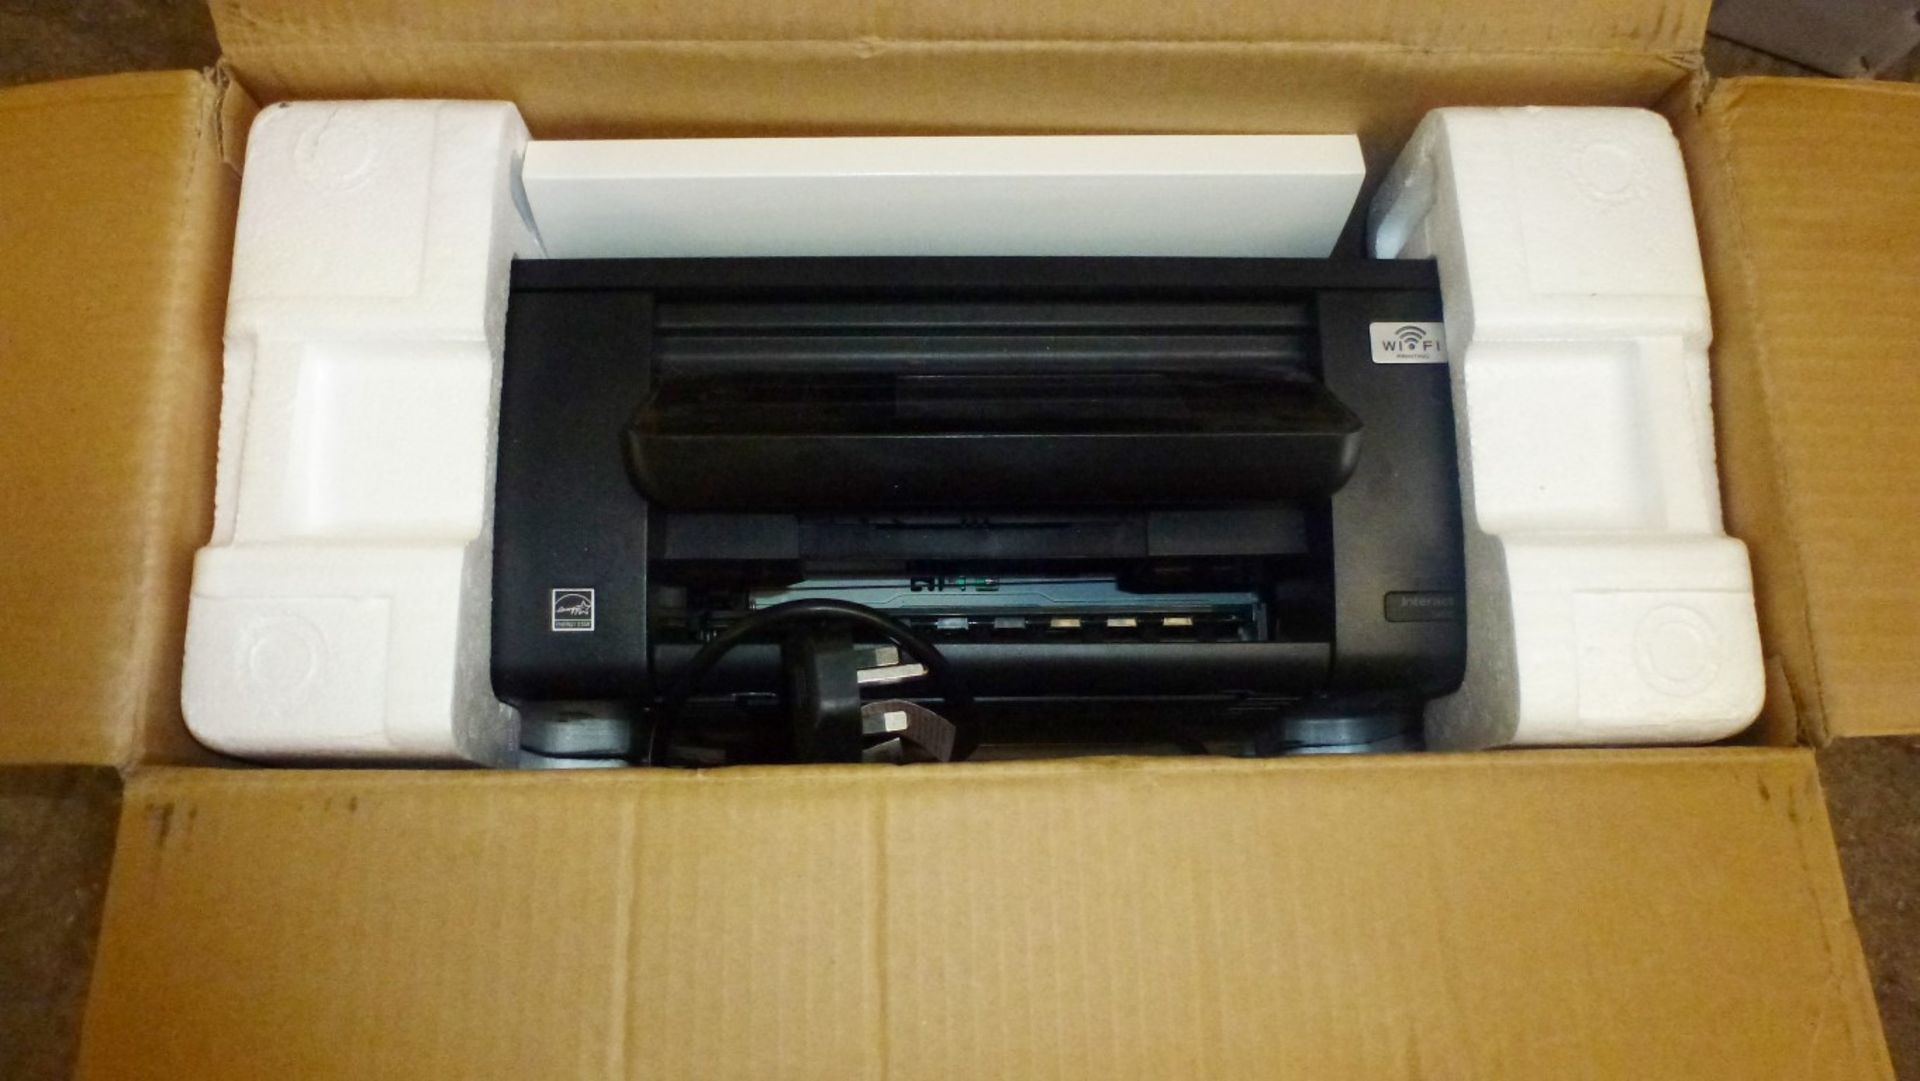 8 x Various Printers - Models Include Epson Stylus SX535WD, HP Deskjet 3070A, HP Photosmart 5510, - Image 12 of 18